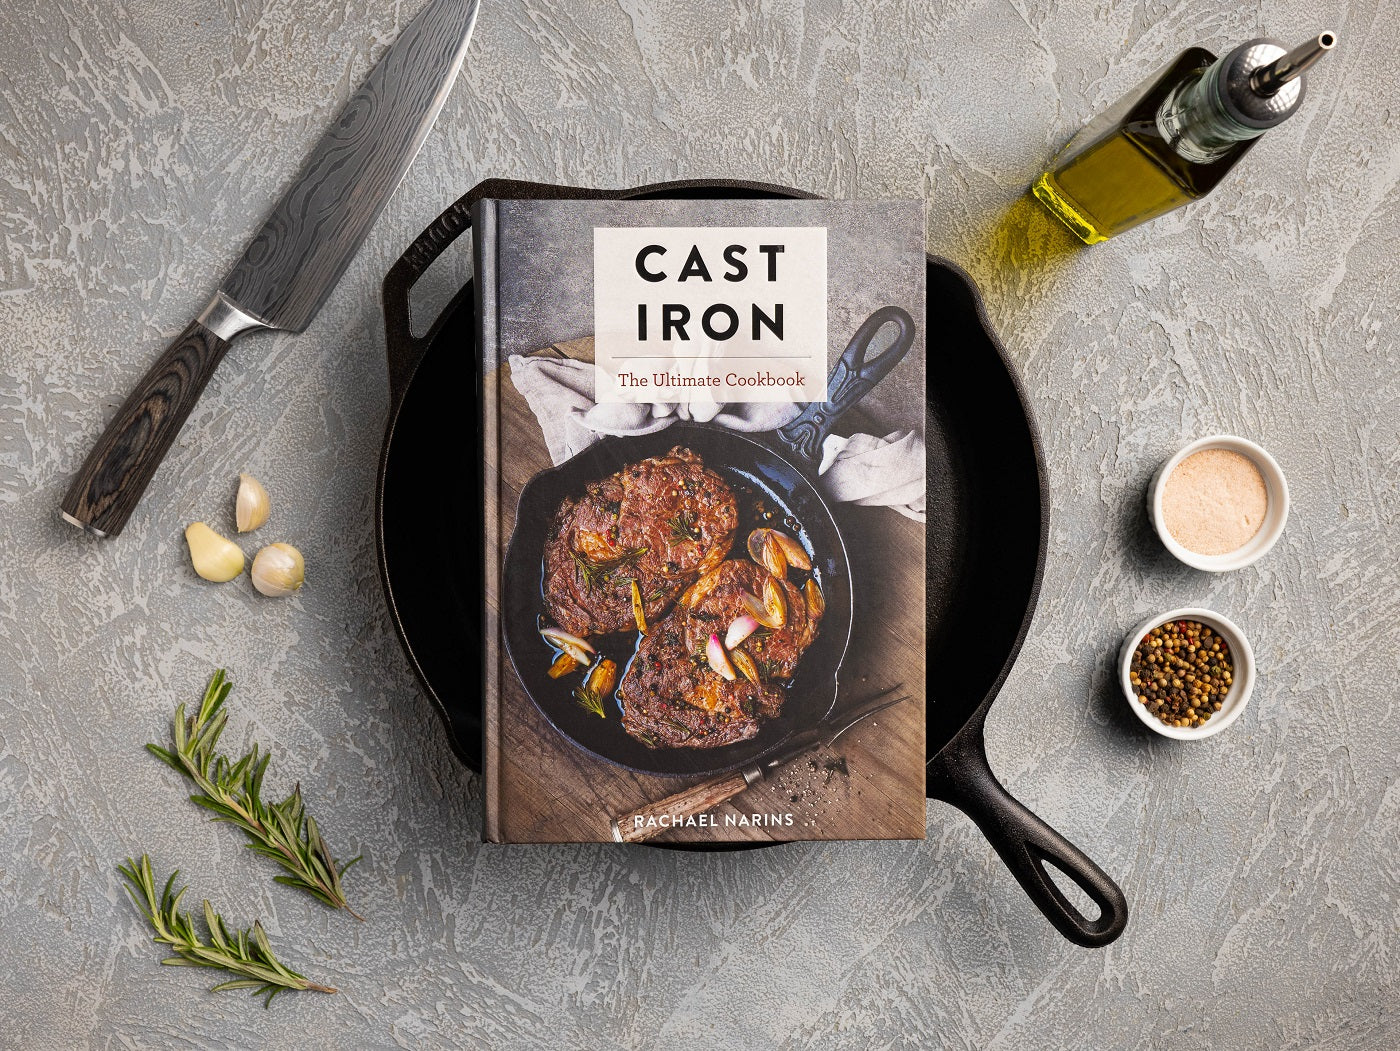 Cast Iron: The Ultimate Cookbook With More Than 300 International Cast Iron Skillet Recipes